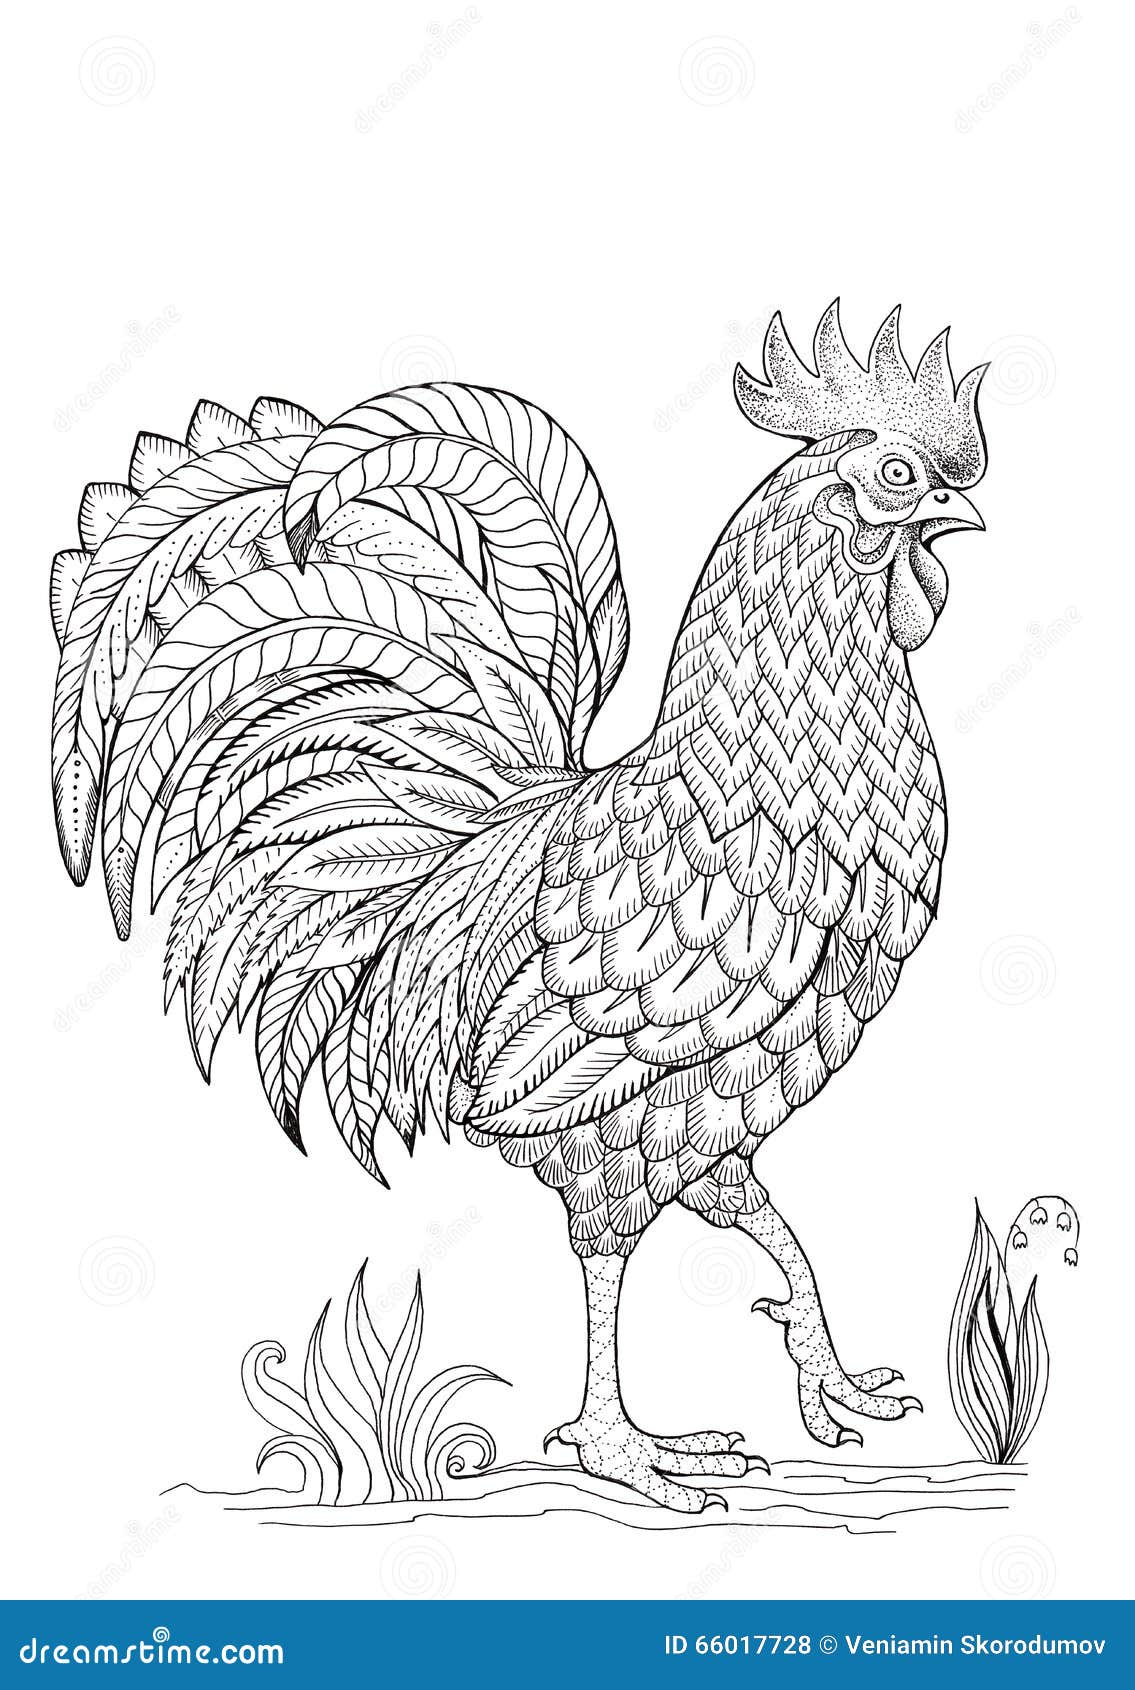 Coloring cock rooster stock illustration Illustration of